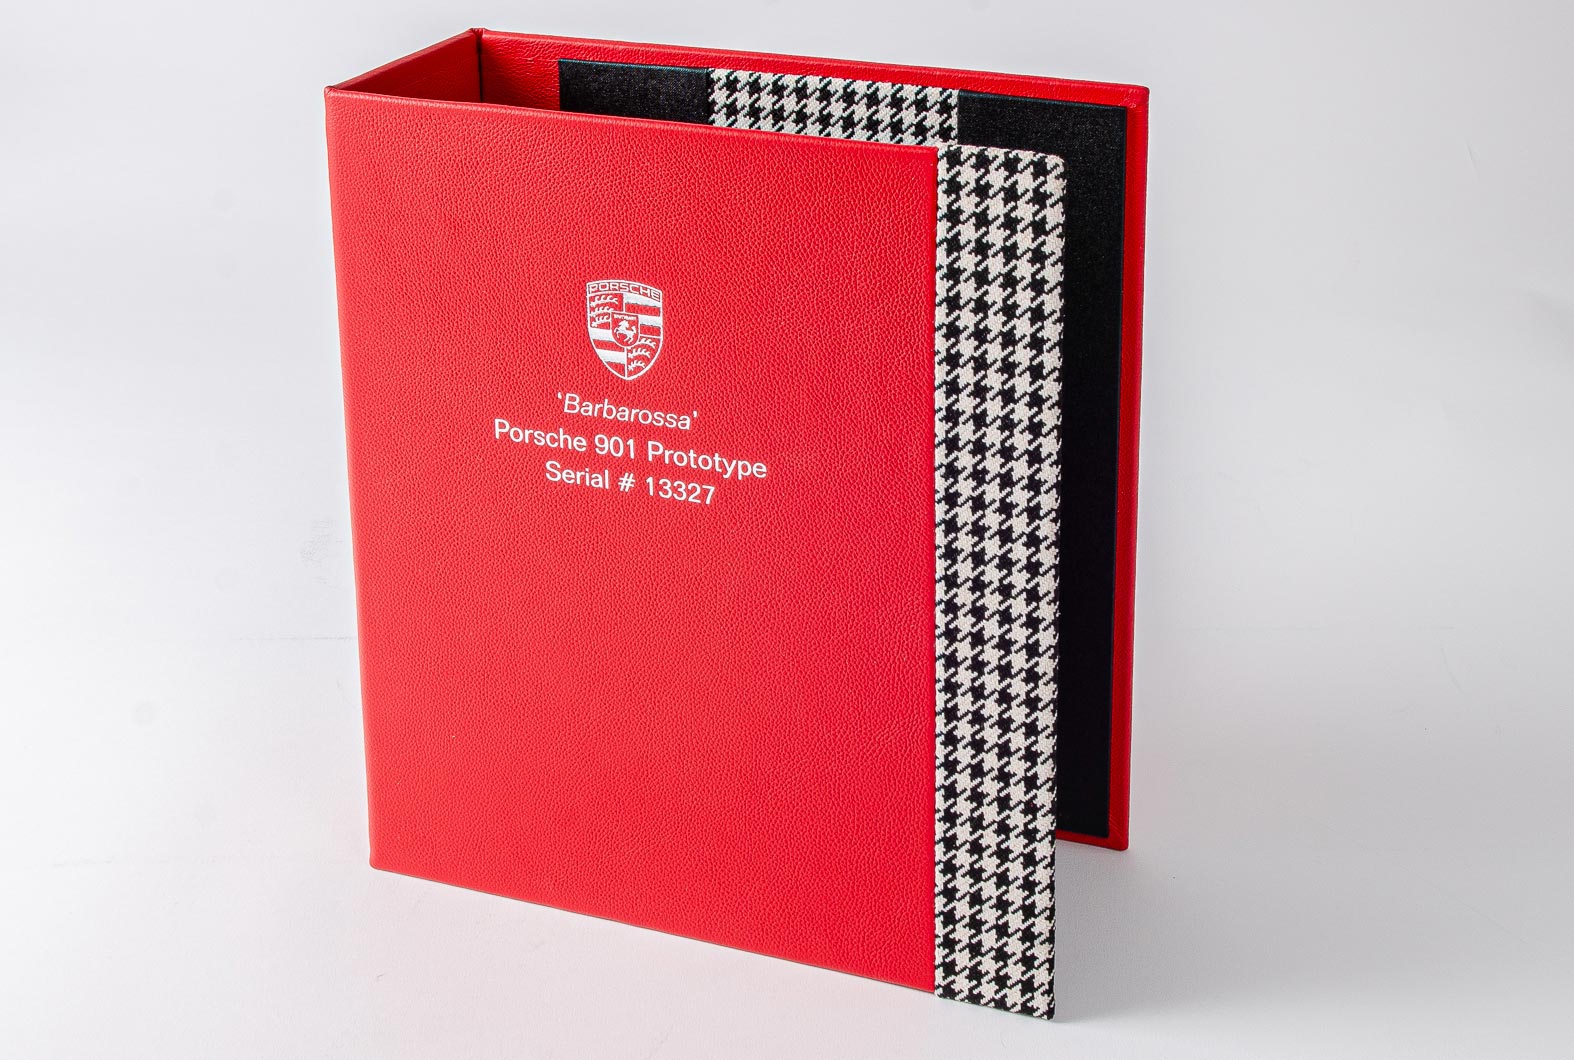 car document history file custom made in red leather with fabric hounds tooth detail and silver foil embossing on the cover